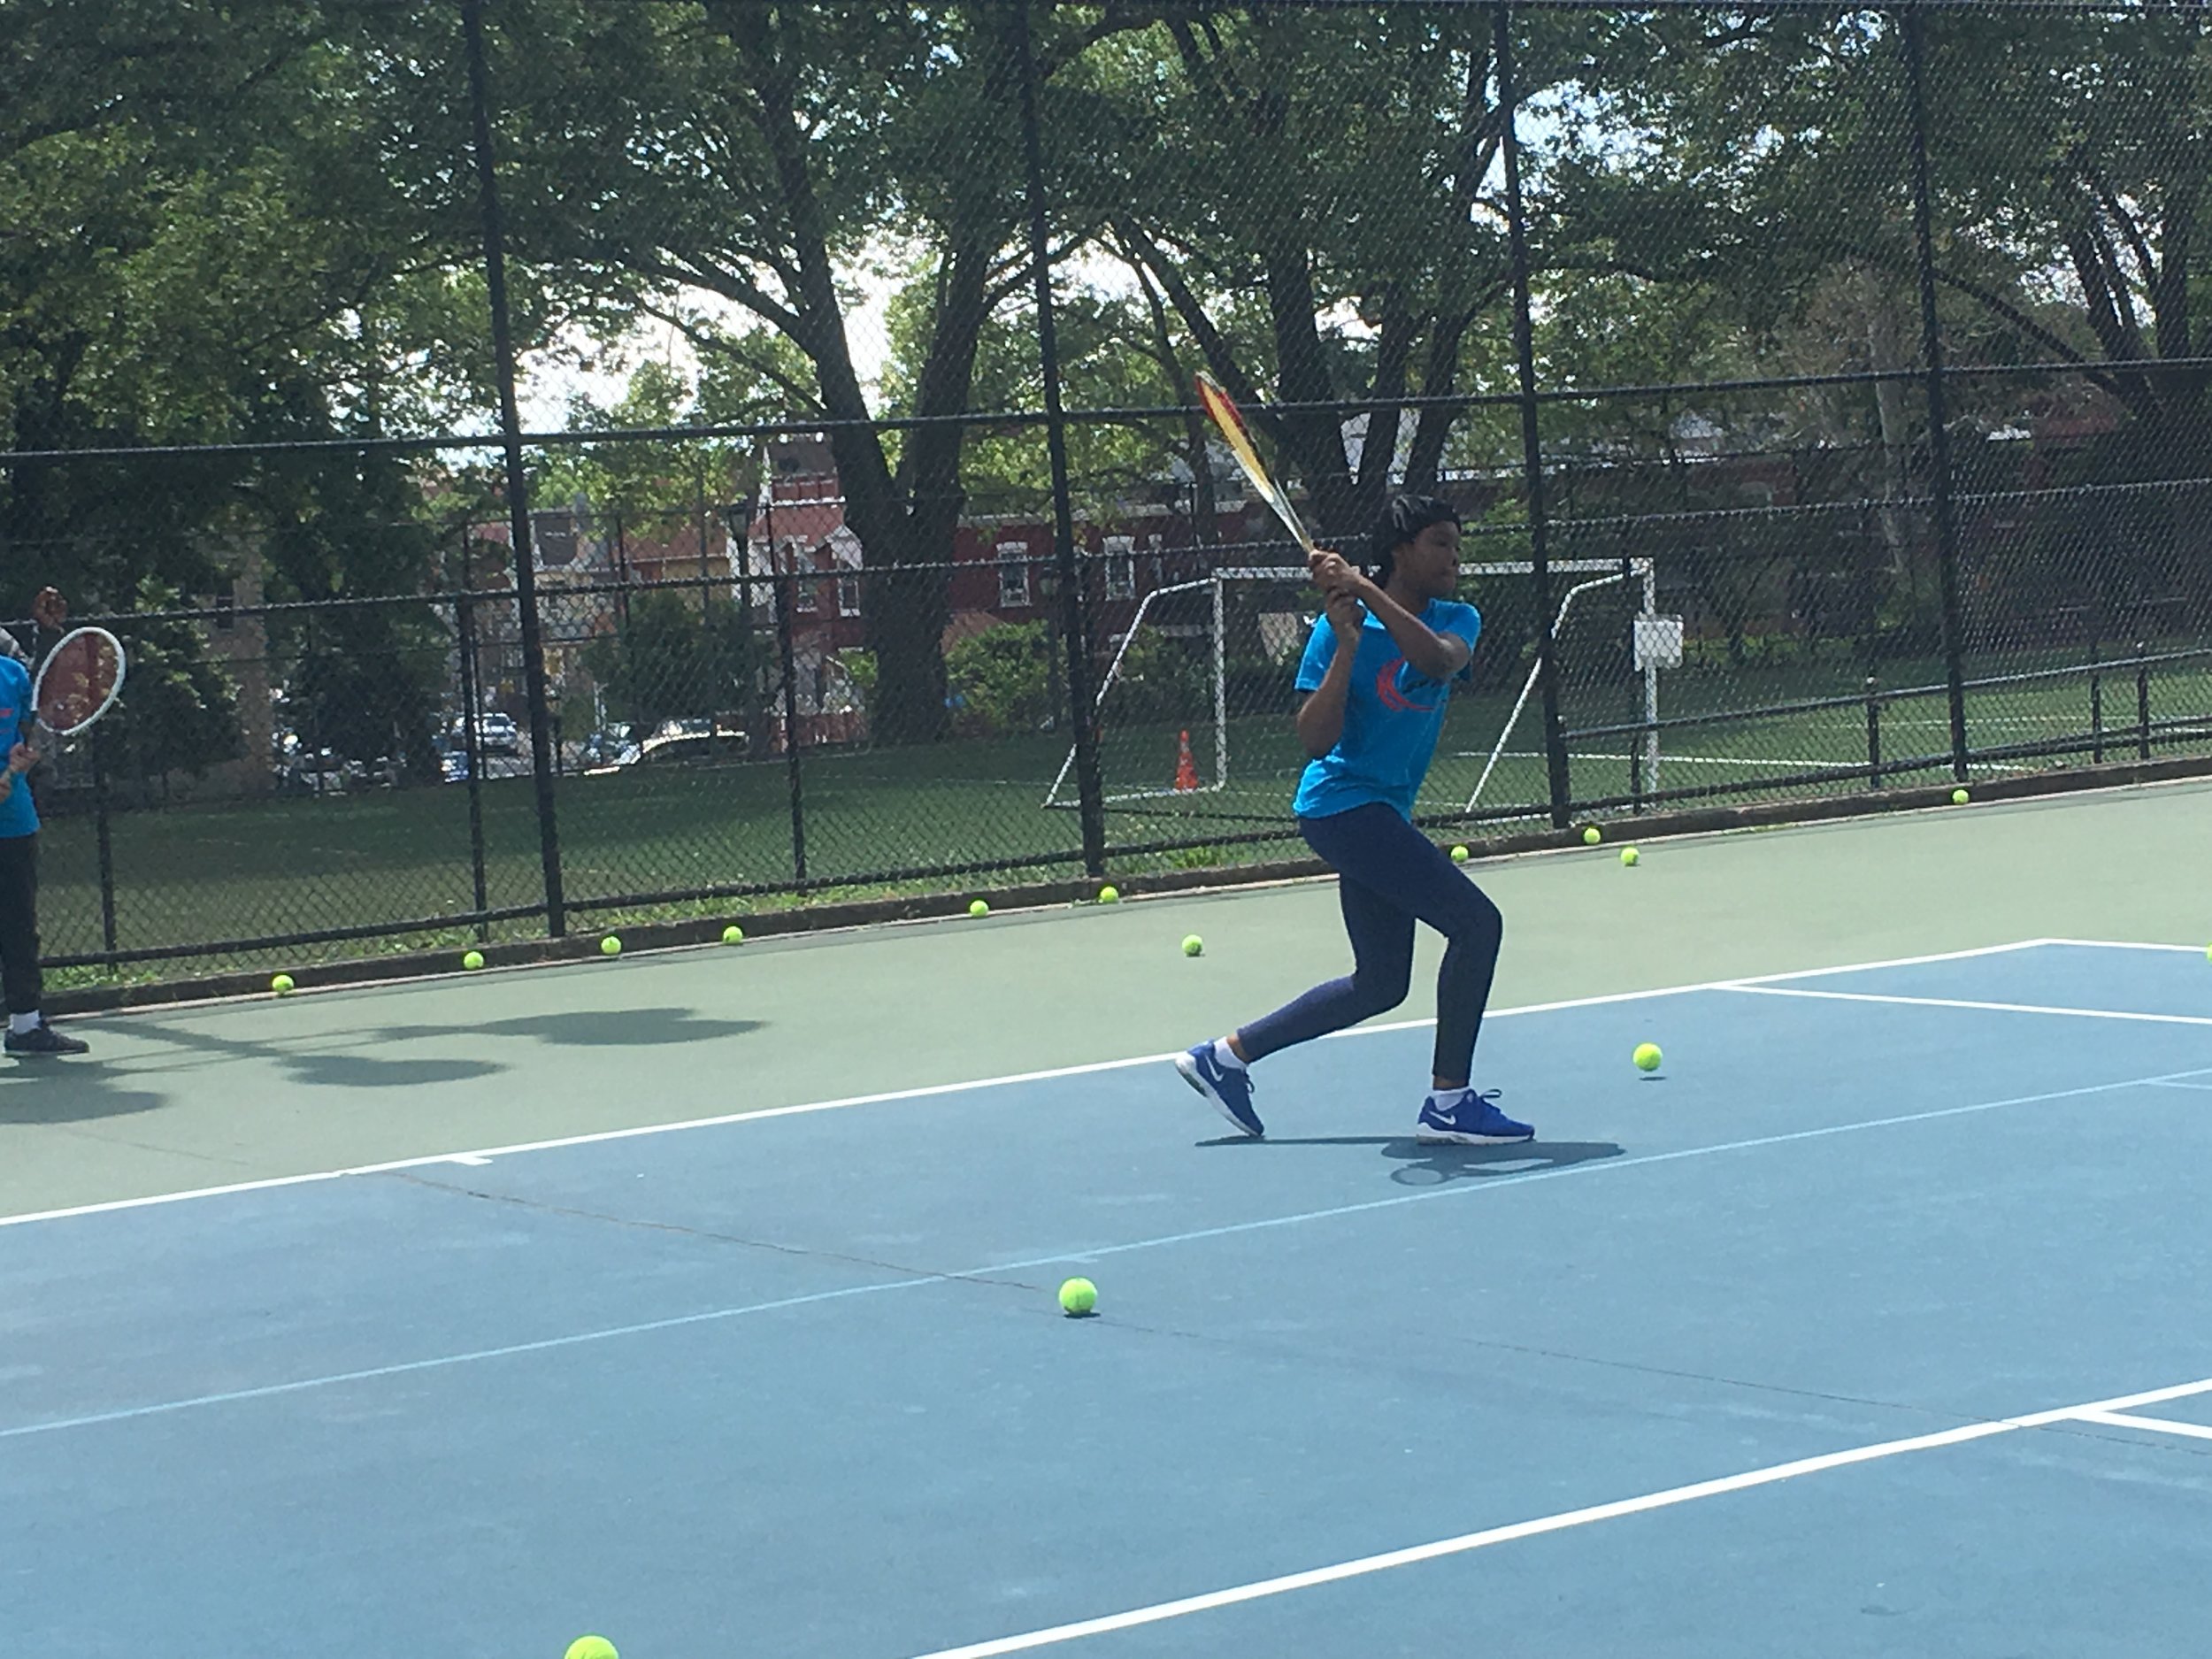 Amaree working on her backhand.